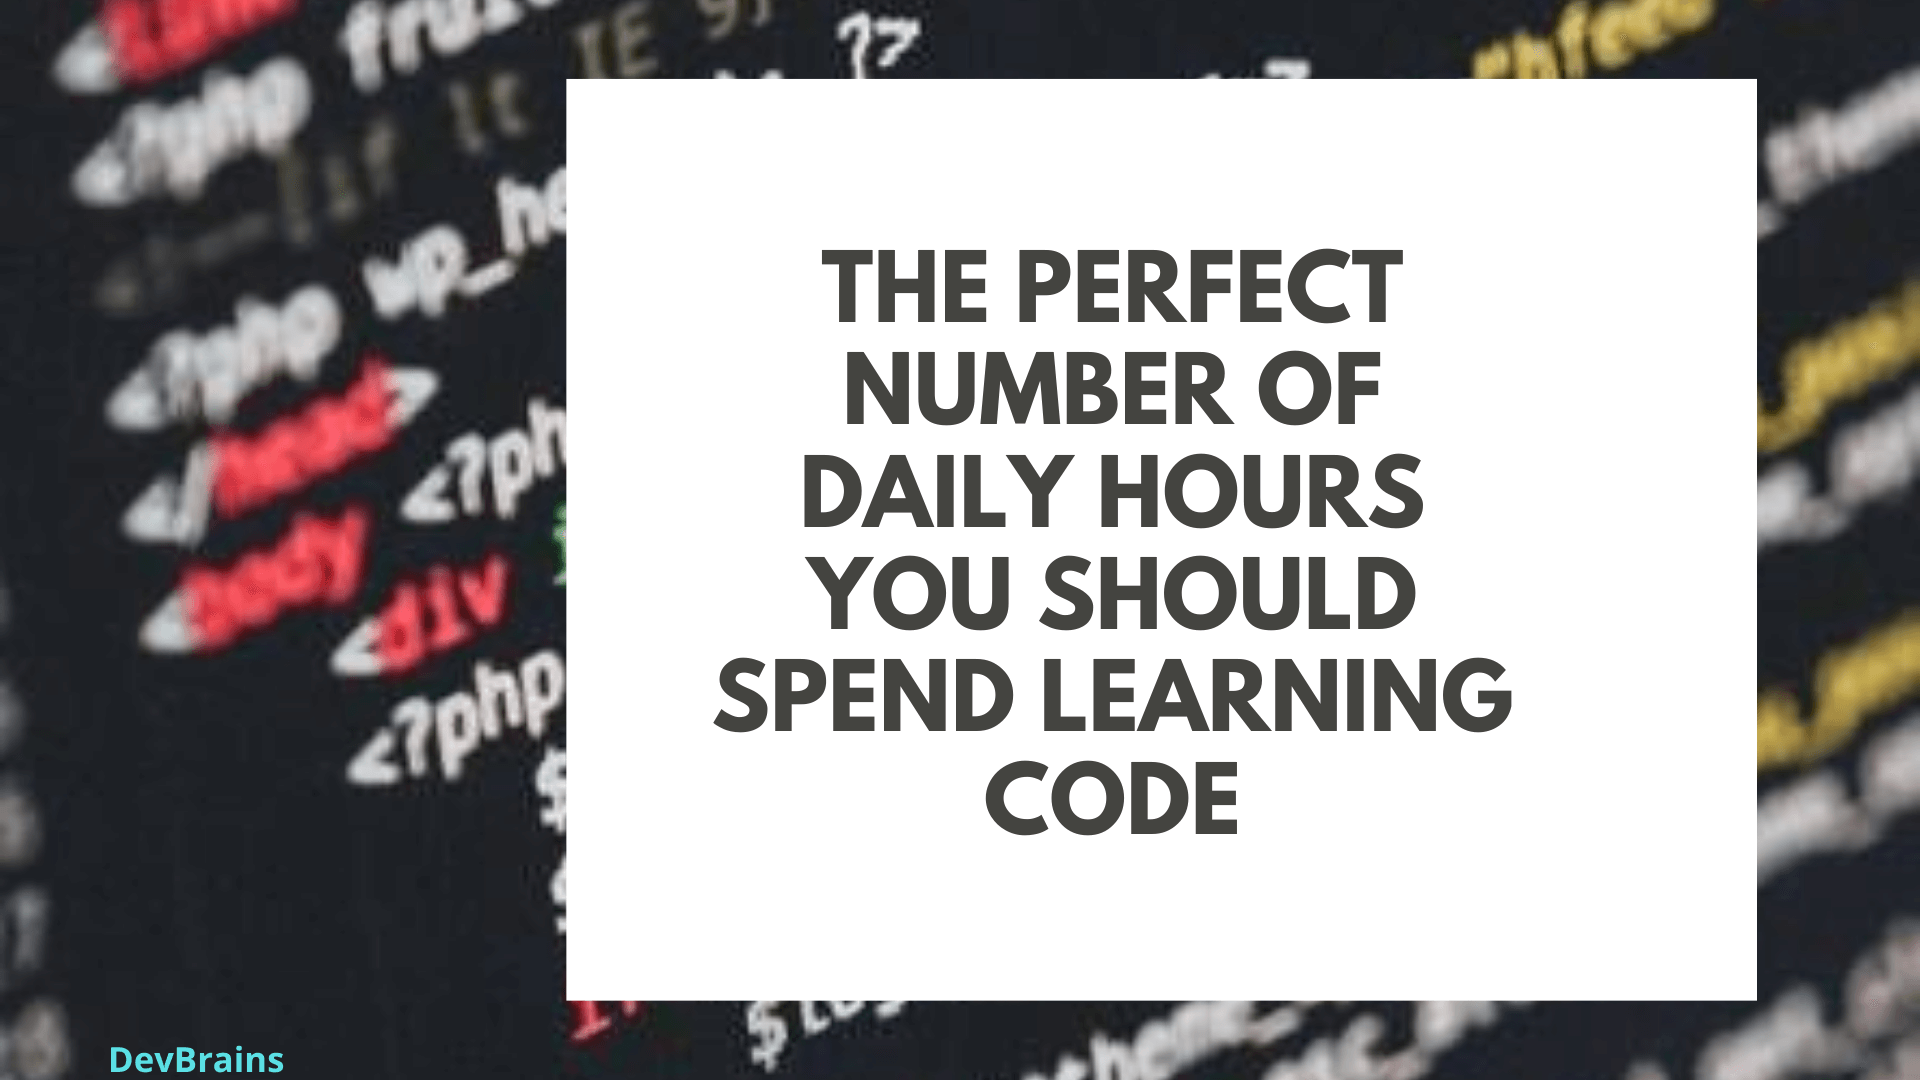 The Perfect Number of Daily Hours You Should Spend Learning Code